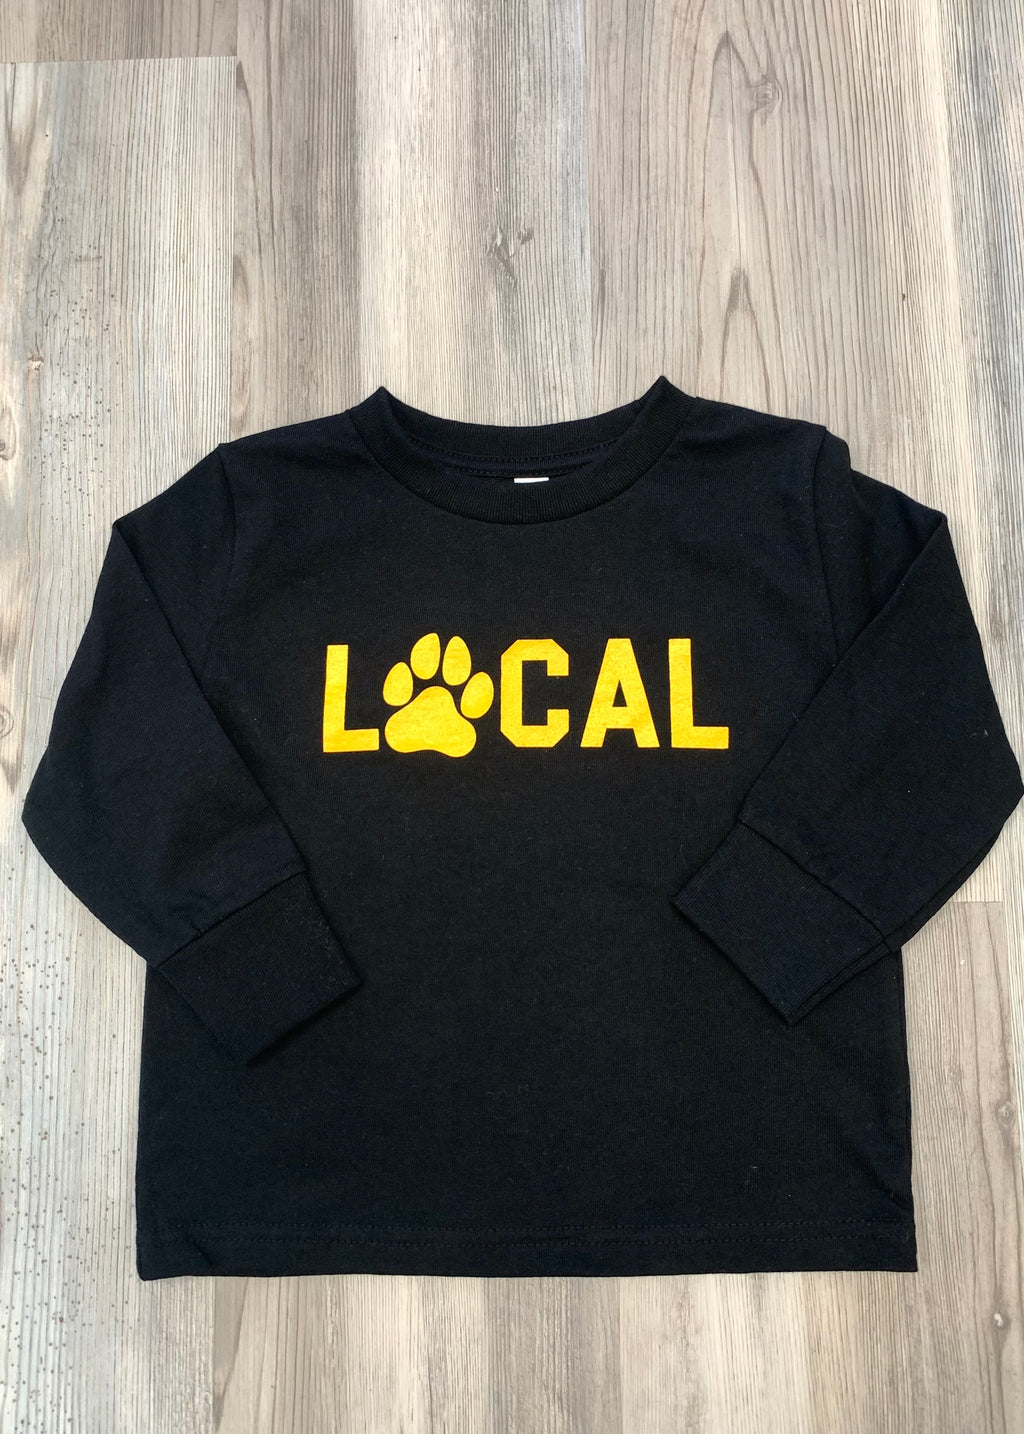 LOCAL Paw Print with 08742 Back-Toddler Long Sleeve